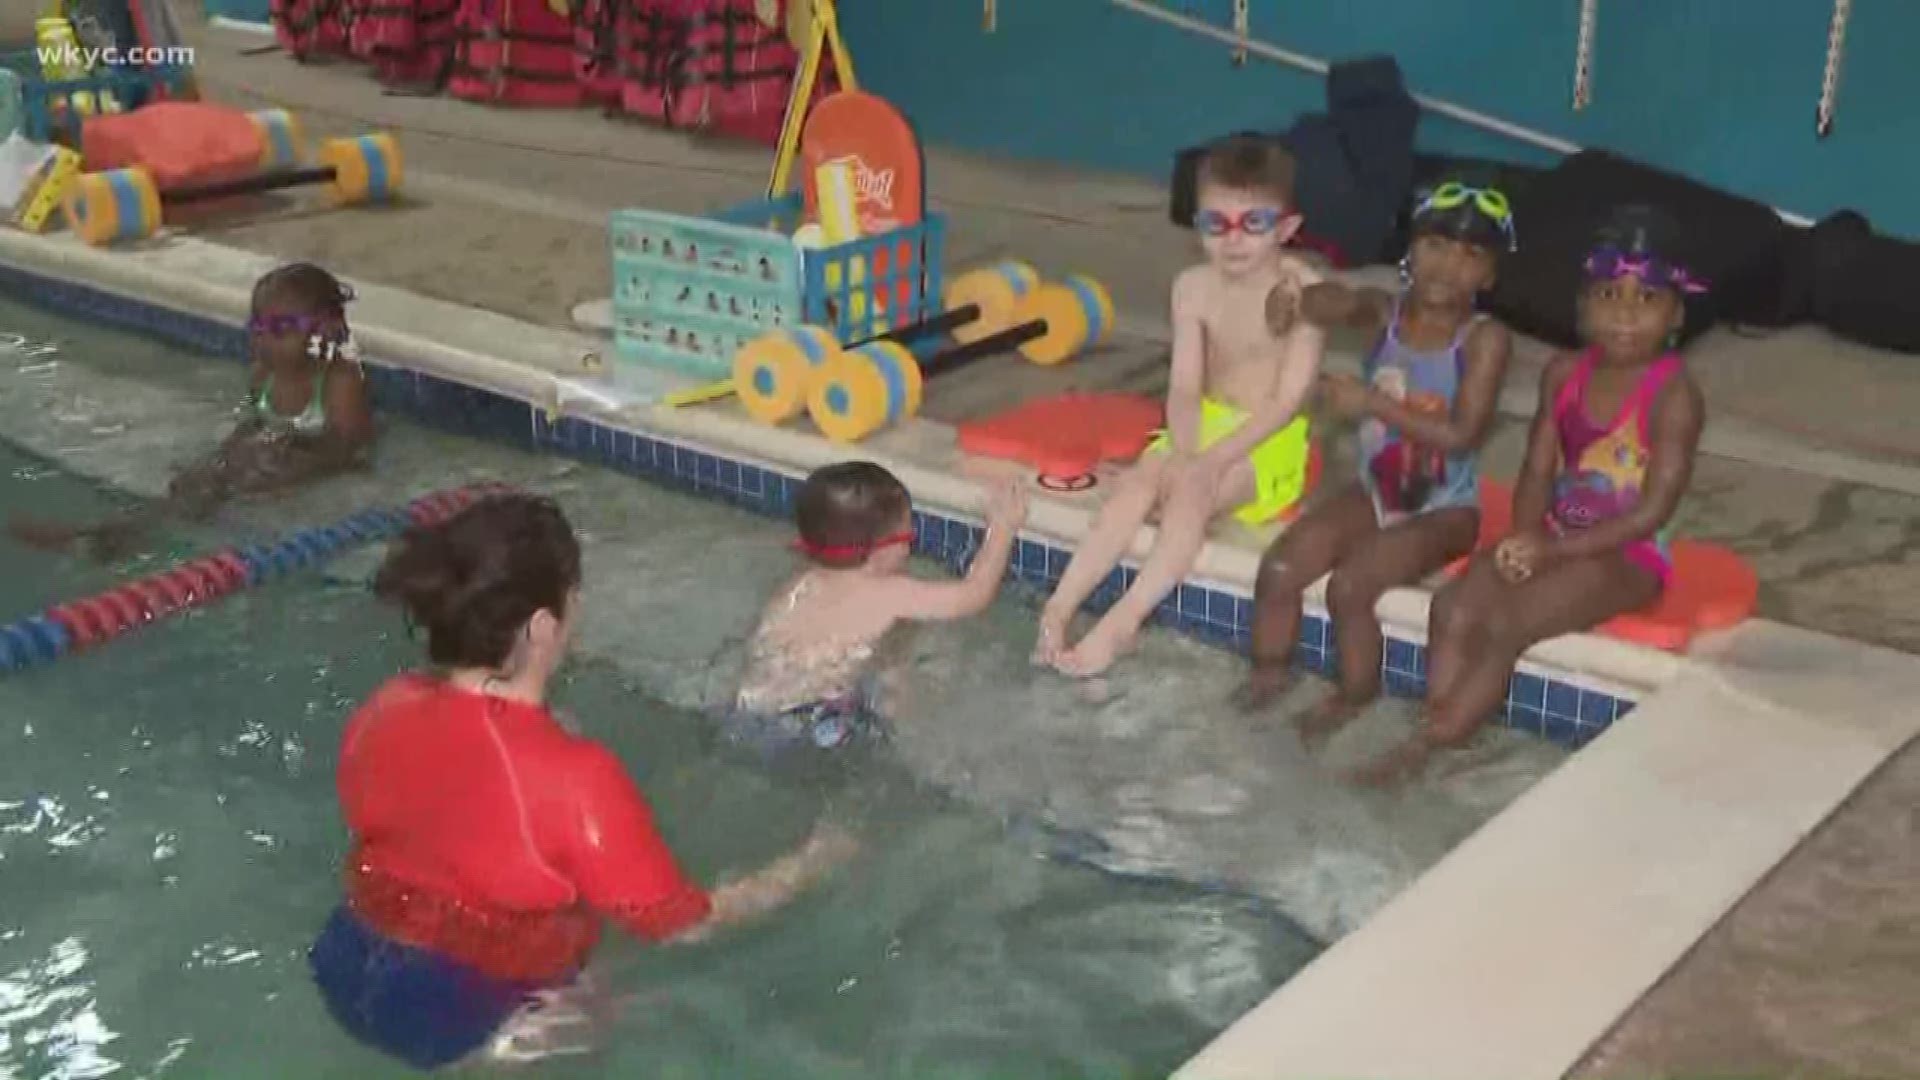 May 24, 2019: Swimming season is here, and we want to make sure your children know the key safety tips before jumping into a pool. We sent Jasmine Monroe to a Goldfish Swim School to talk with the experts about these live-saving suggestions.